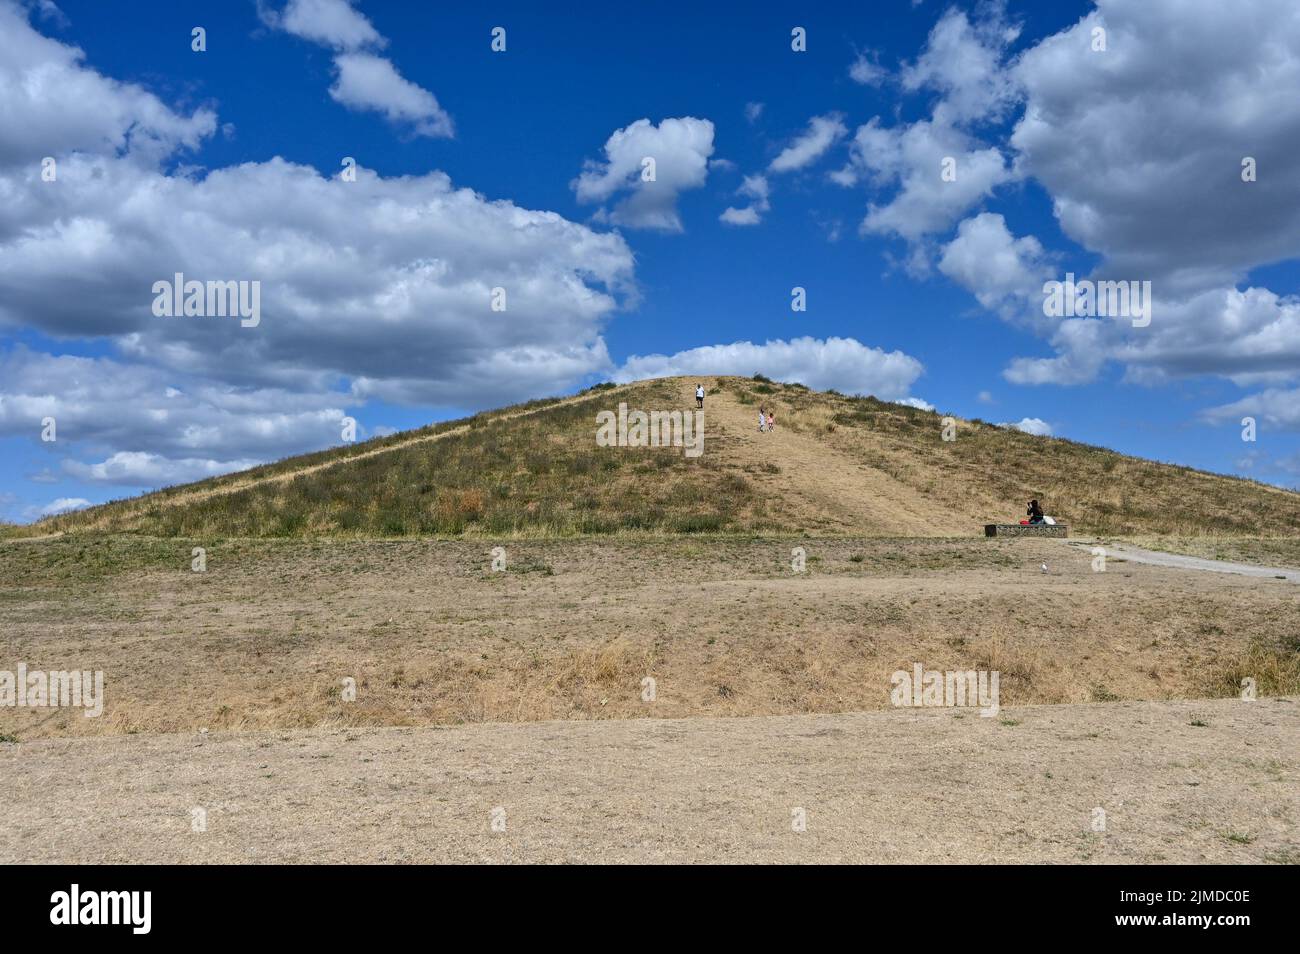 London, UK. 5th Aug 2022. Northala Fields man-made hills created from the rubble of Wembley and White City stadiums, London, UK. 5th August 2022. Credit: See Li/Picture Capital/Alamy Live News Stock Photo